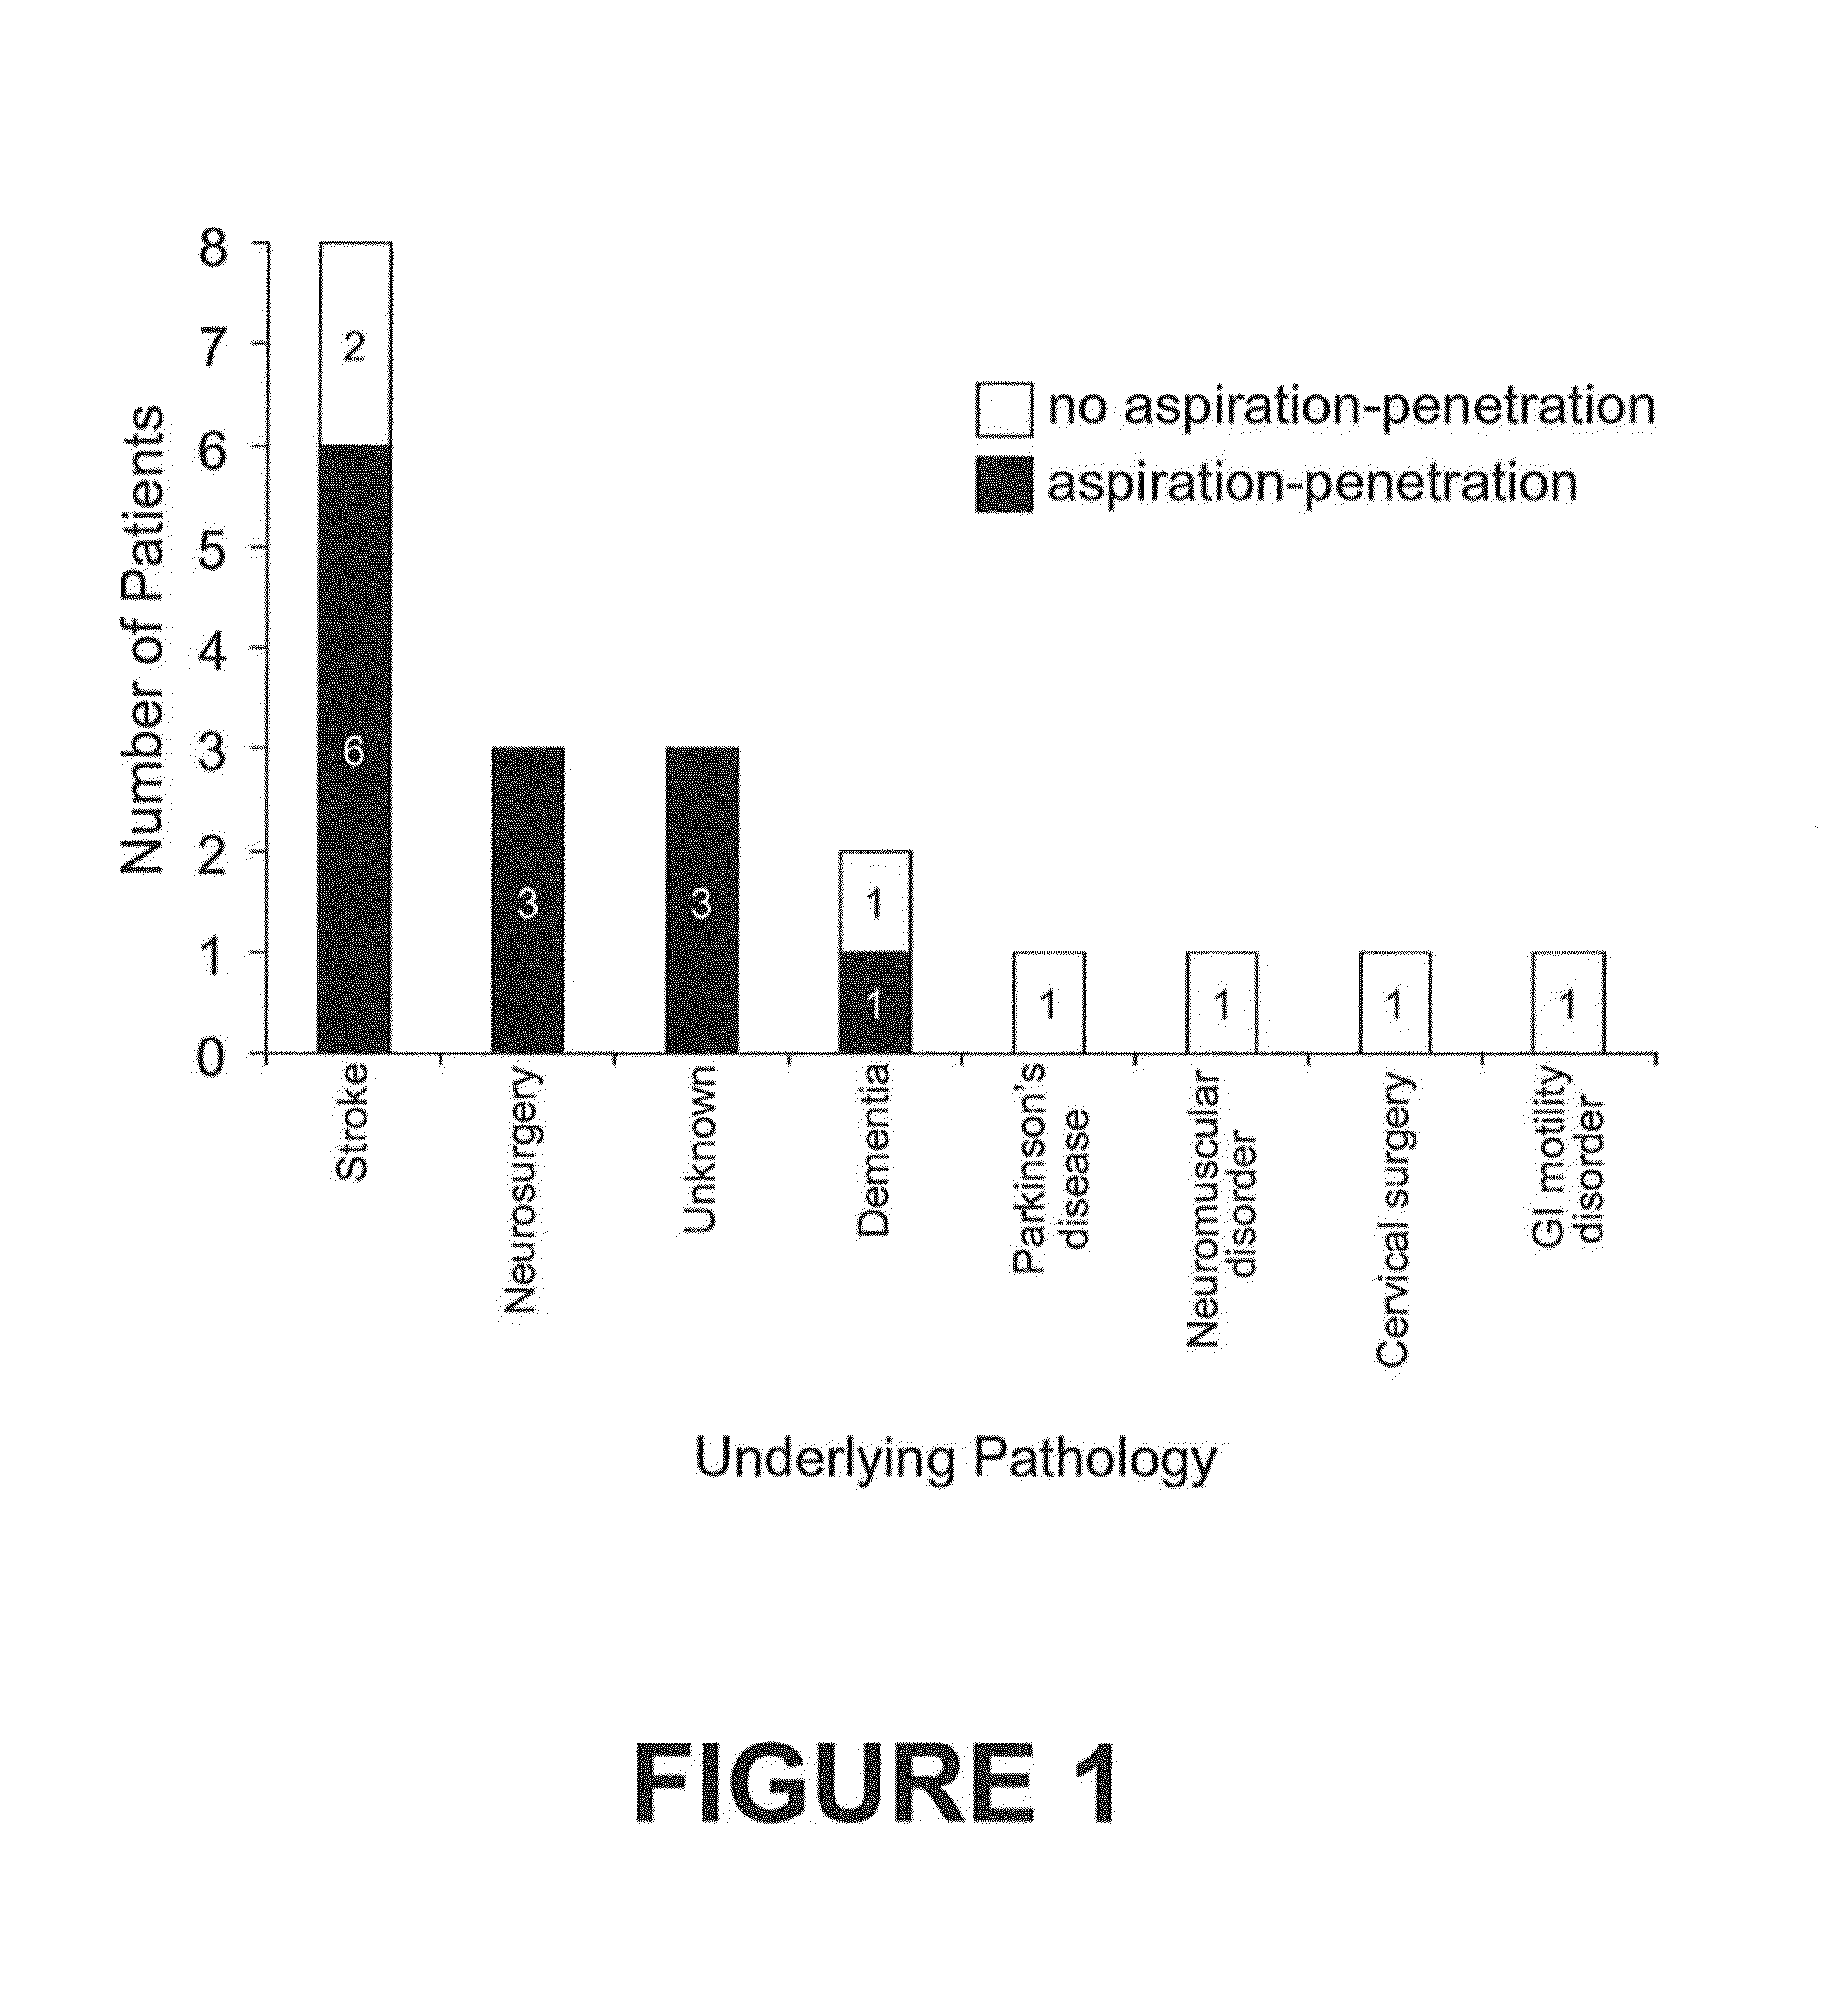 Swallowing motor function measurement and assessment tools, methods, and apparatus